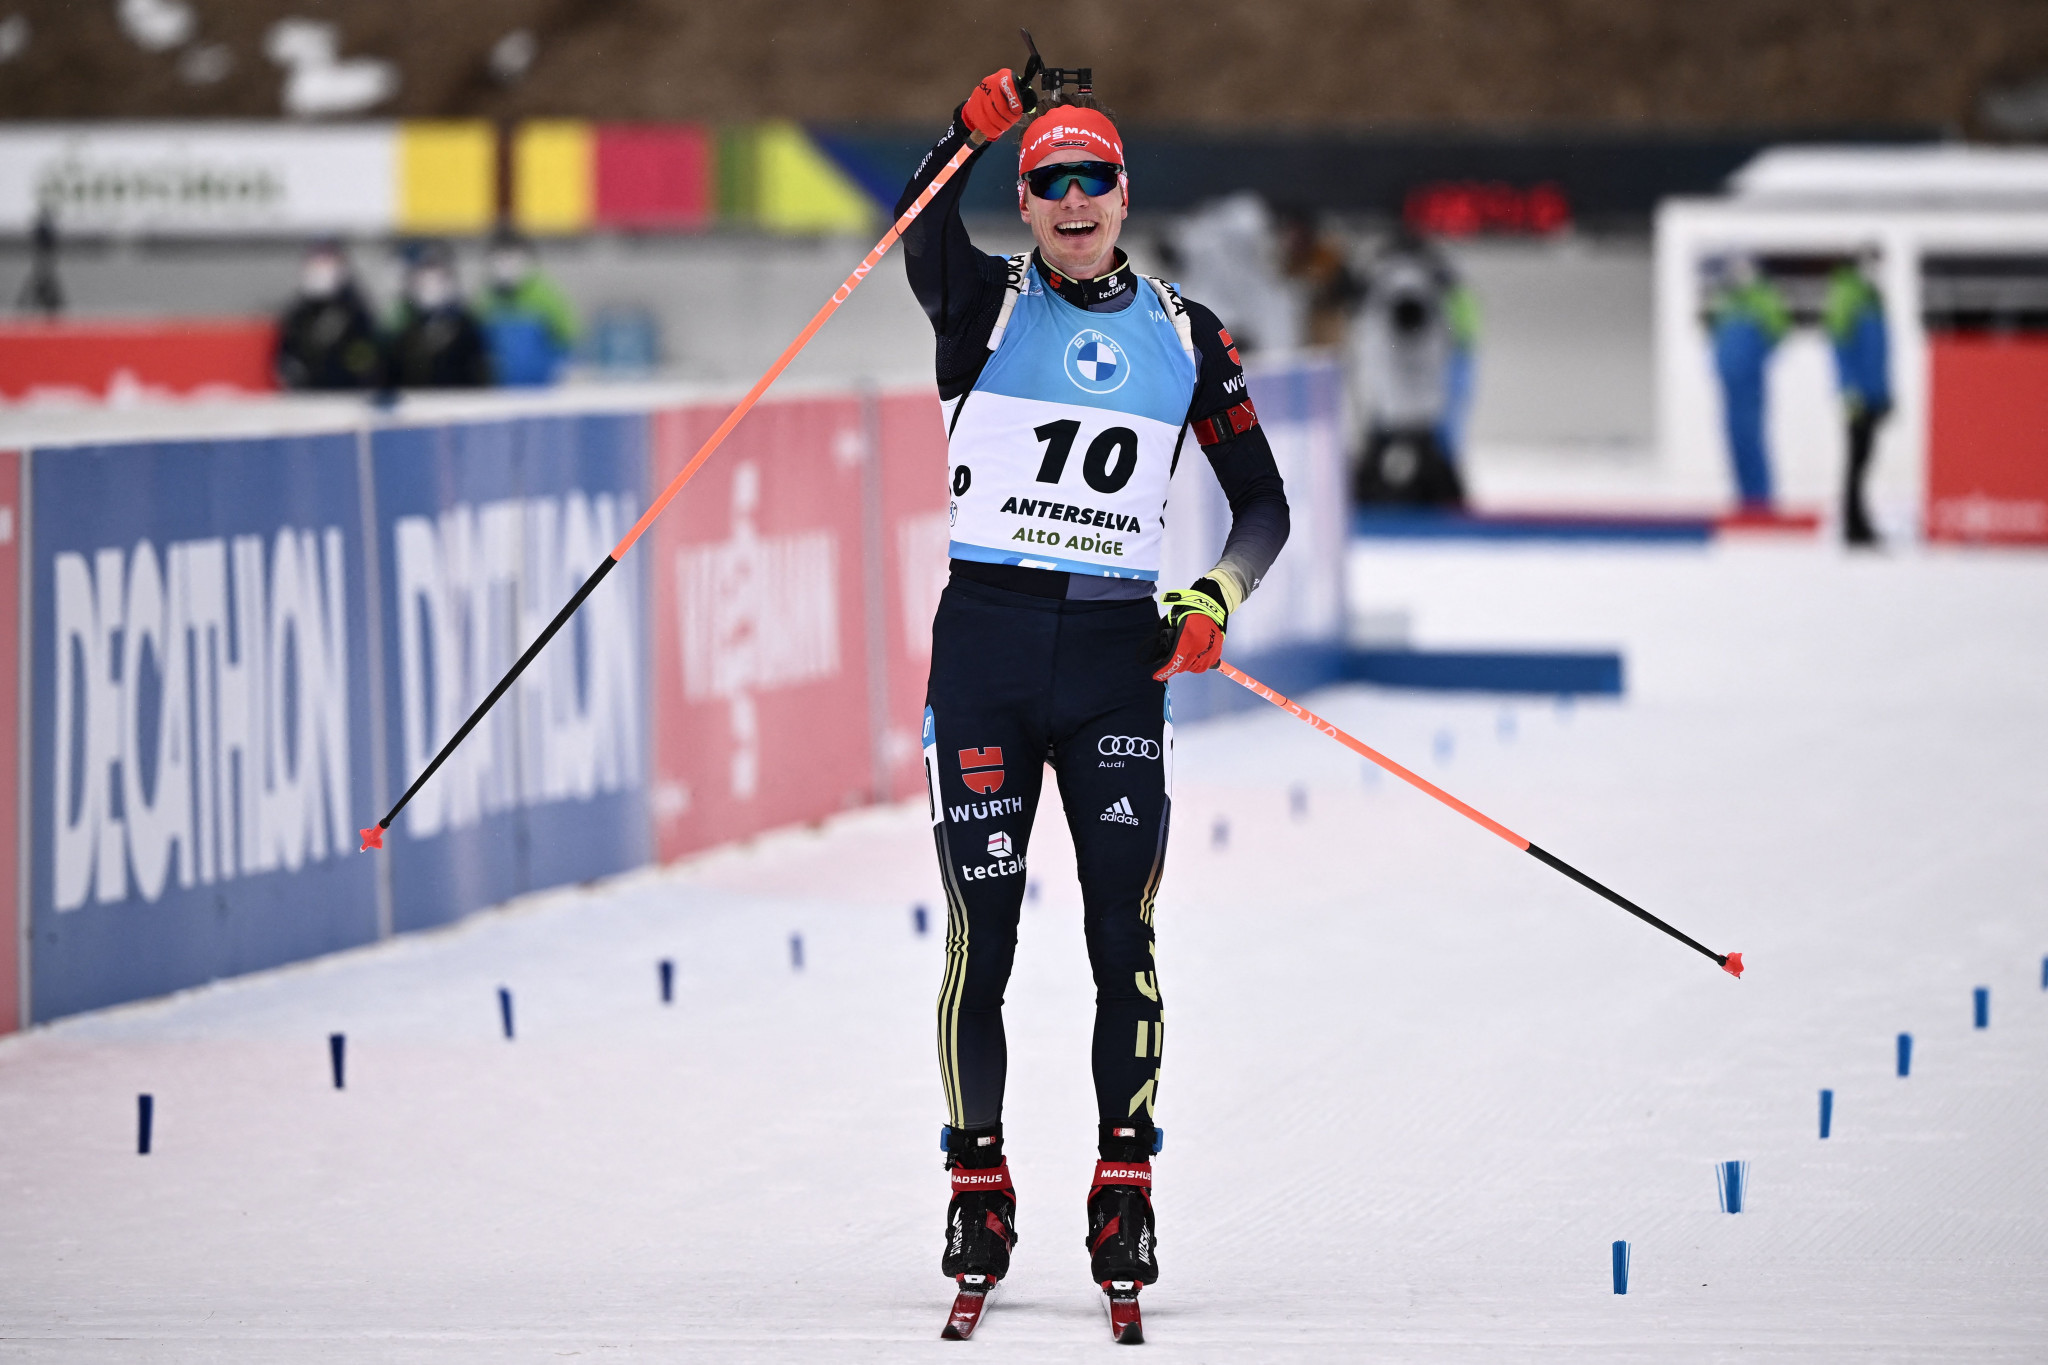 Doll and Norway's women taste victory in Biathlon World Cup at Antholz-Anterselva